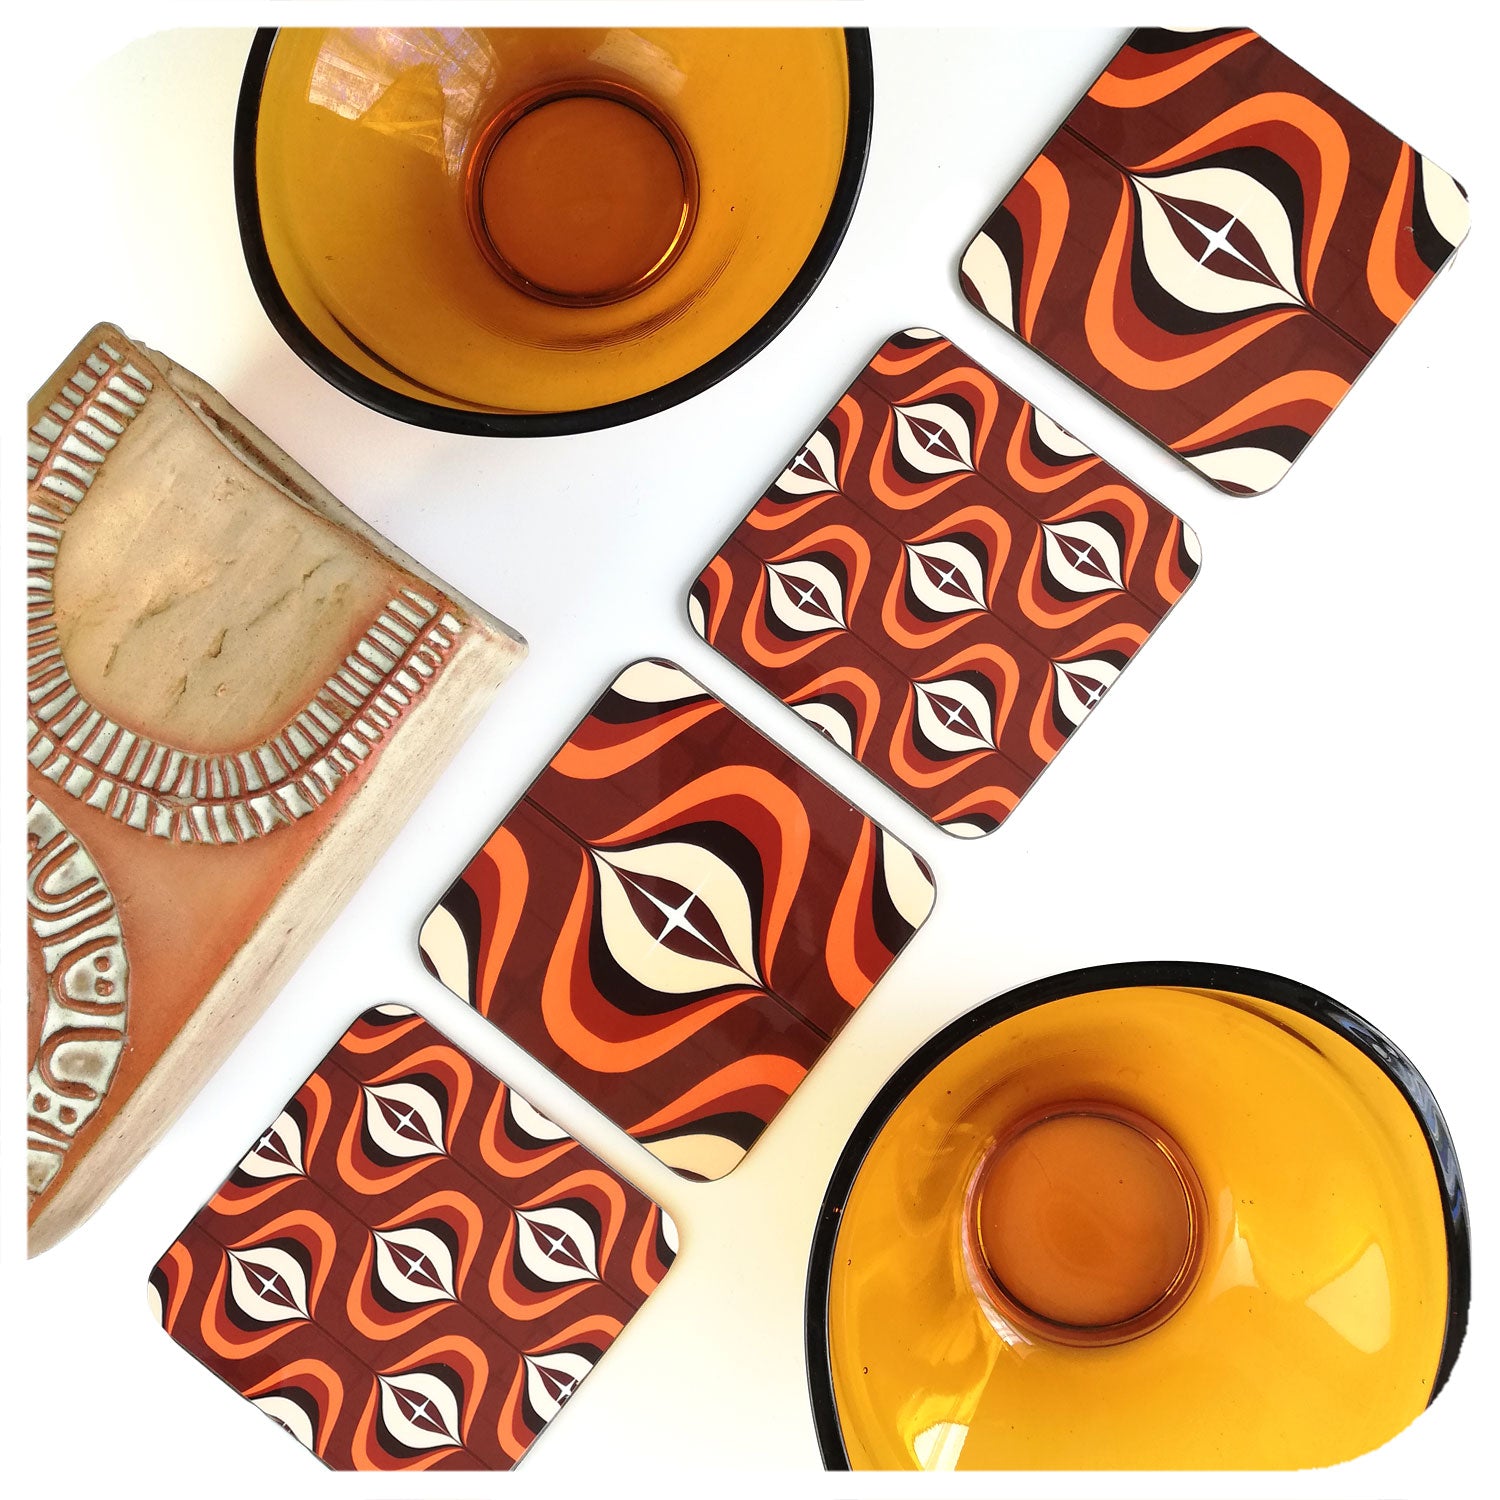 1970s Brown Op Art Coasters with vintage vase and bowls | The Inkabilly Emporium